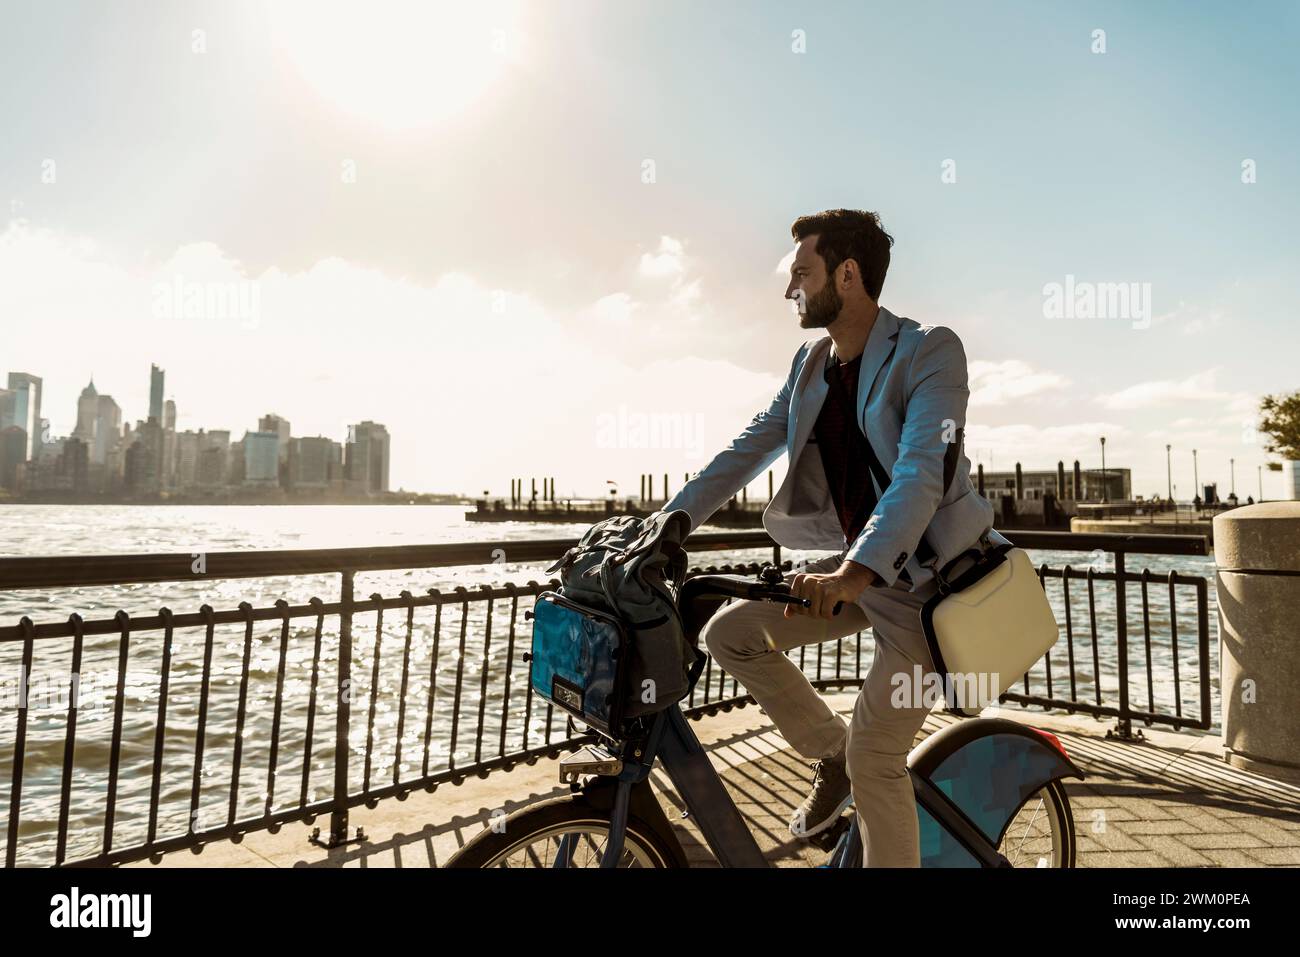 Businessman cycling on promenade in city Stock Photo